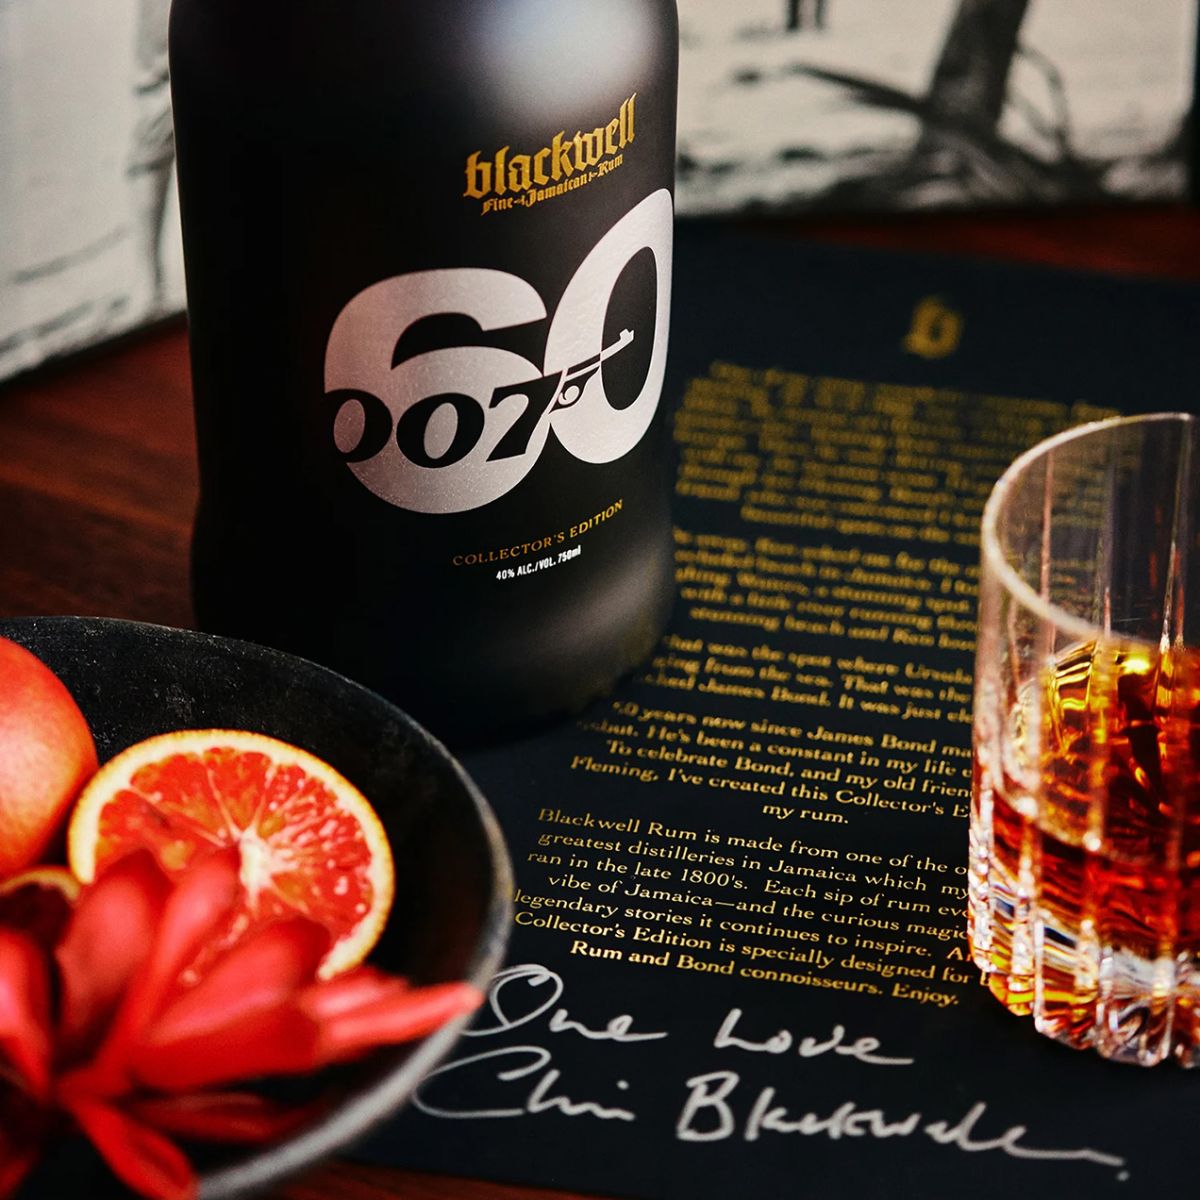 Blackwell Limited James Bond Jamaican Rum Signed and Numbered Edition bottle